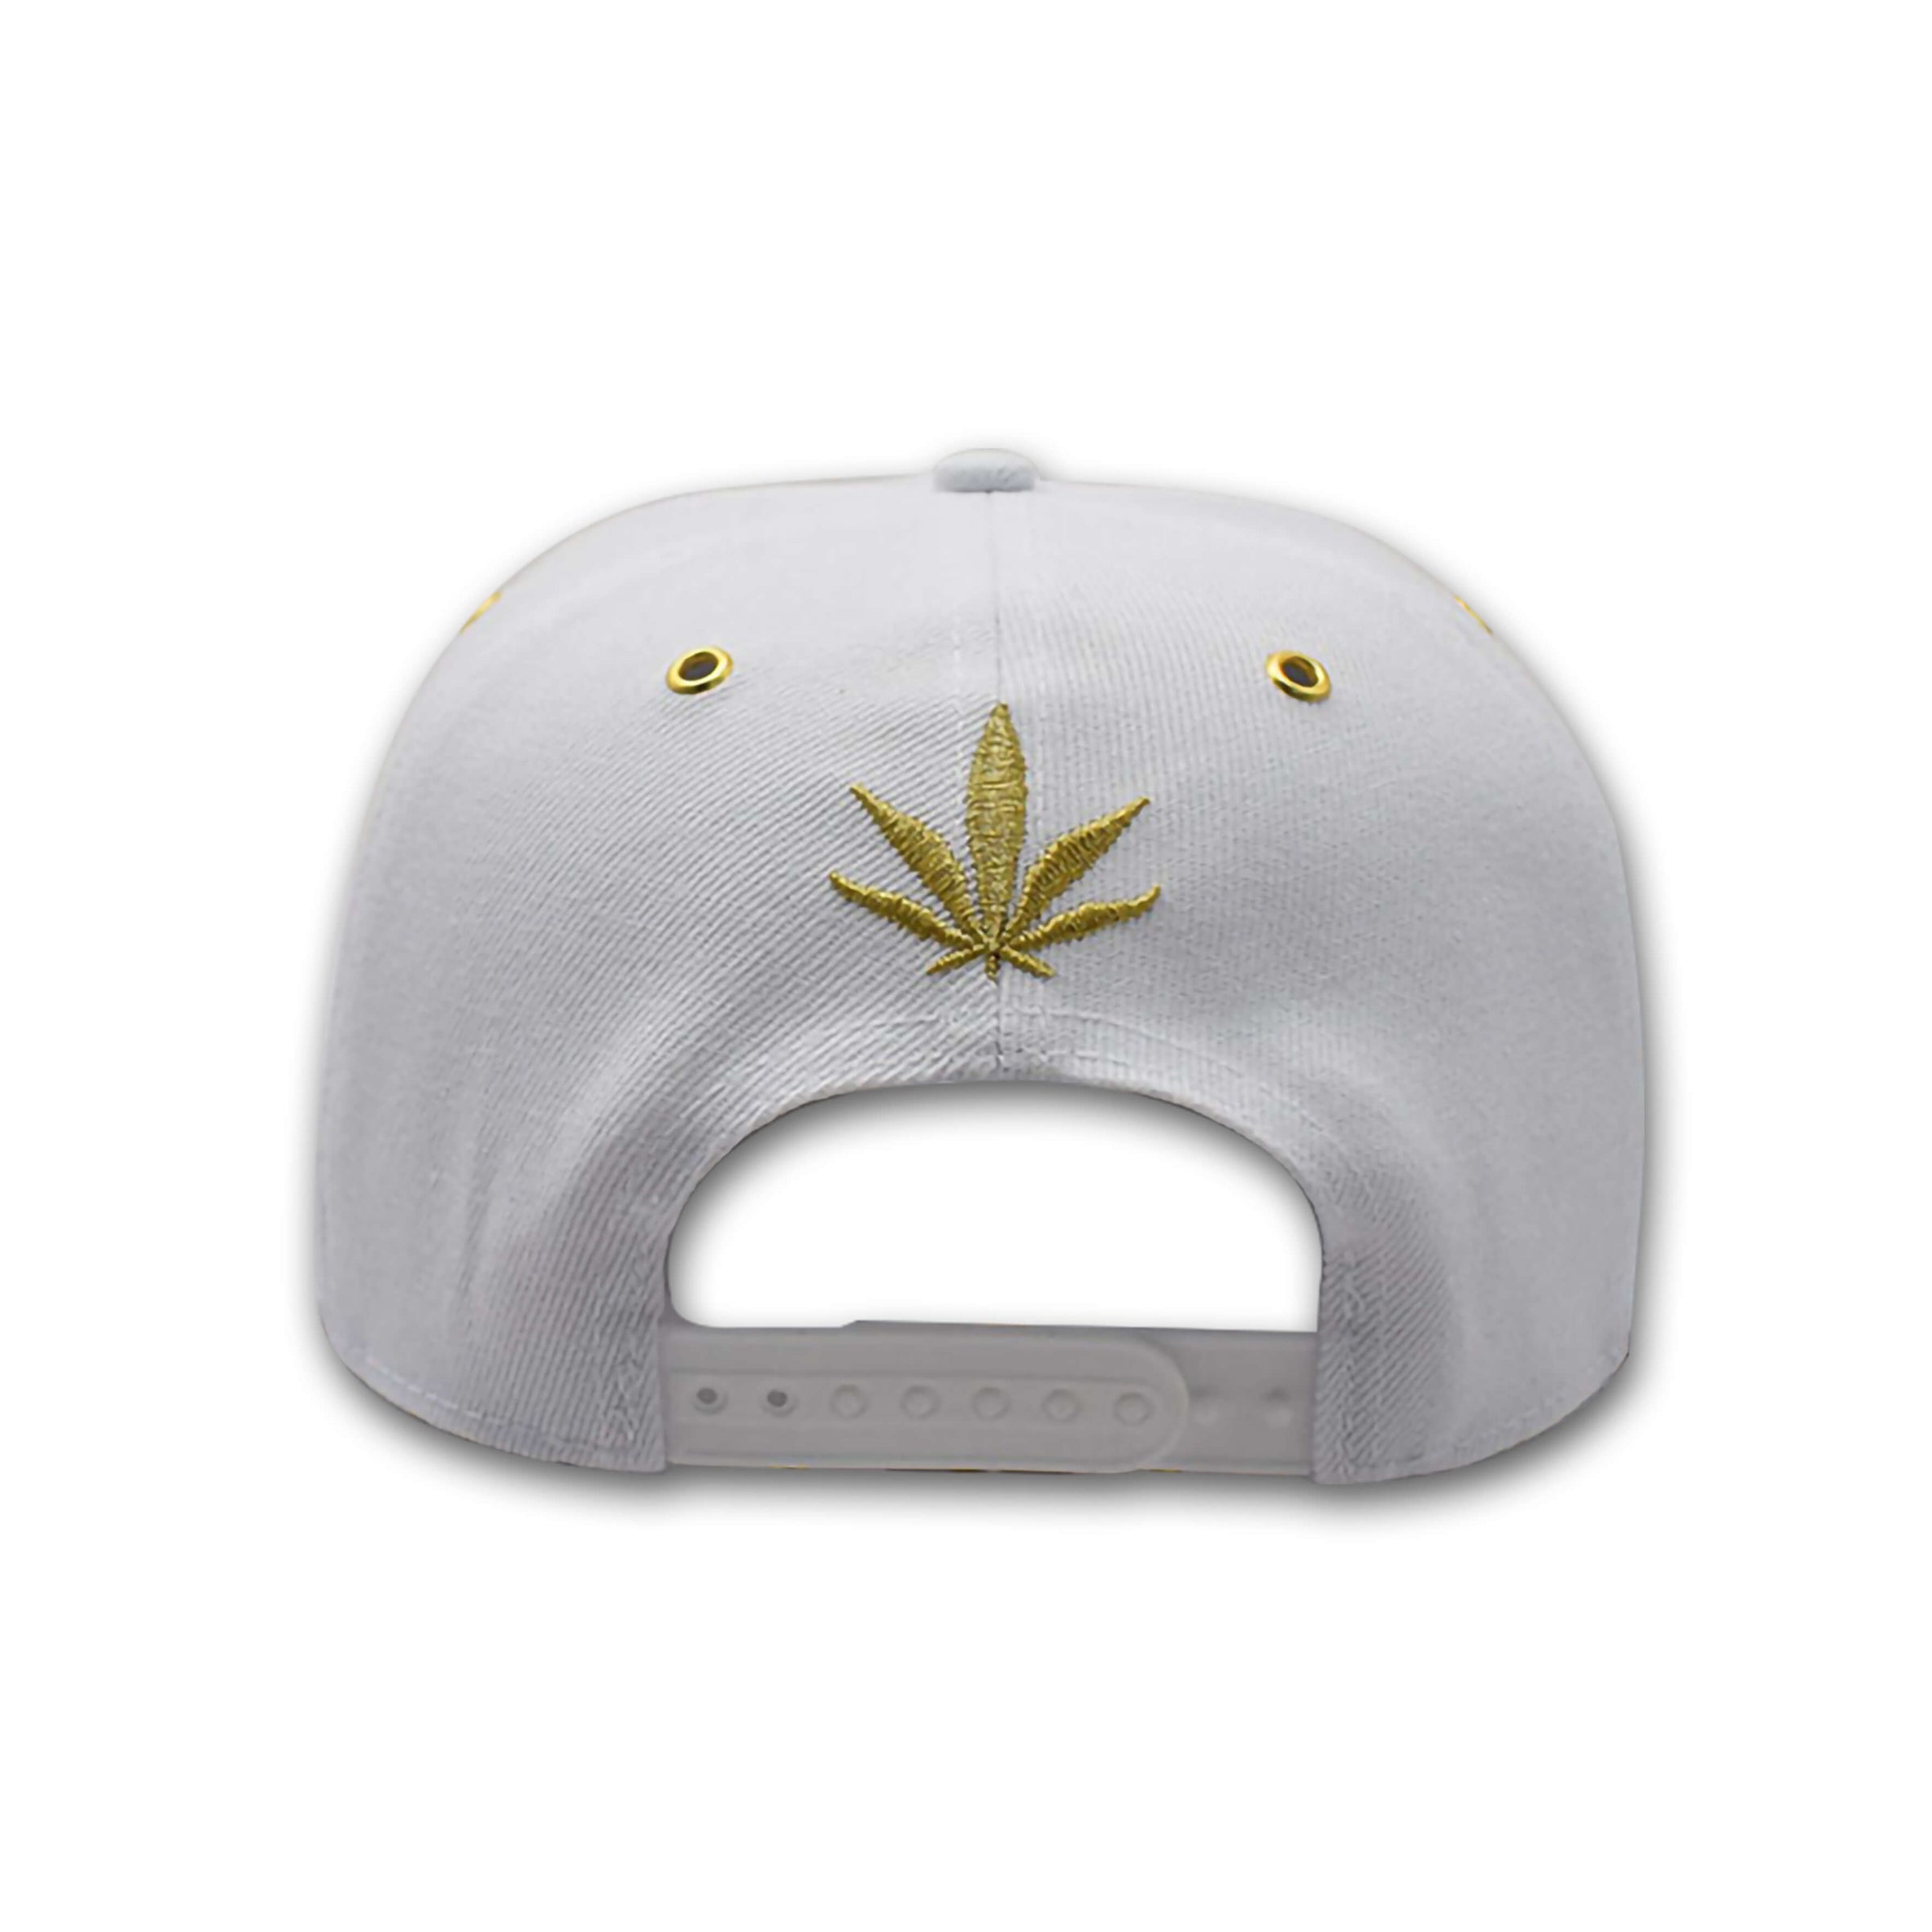 LIMITED EDITION - Billionaire Hemp Wraps Snapback White and Gold Hat –